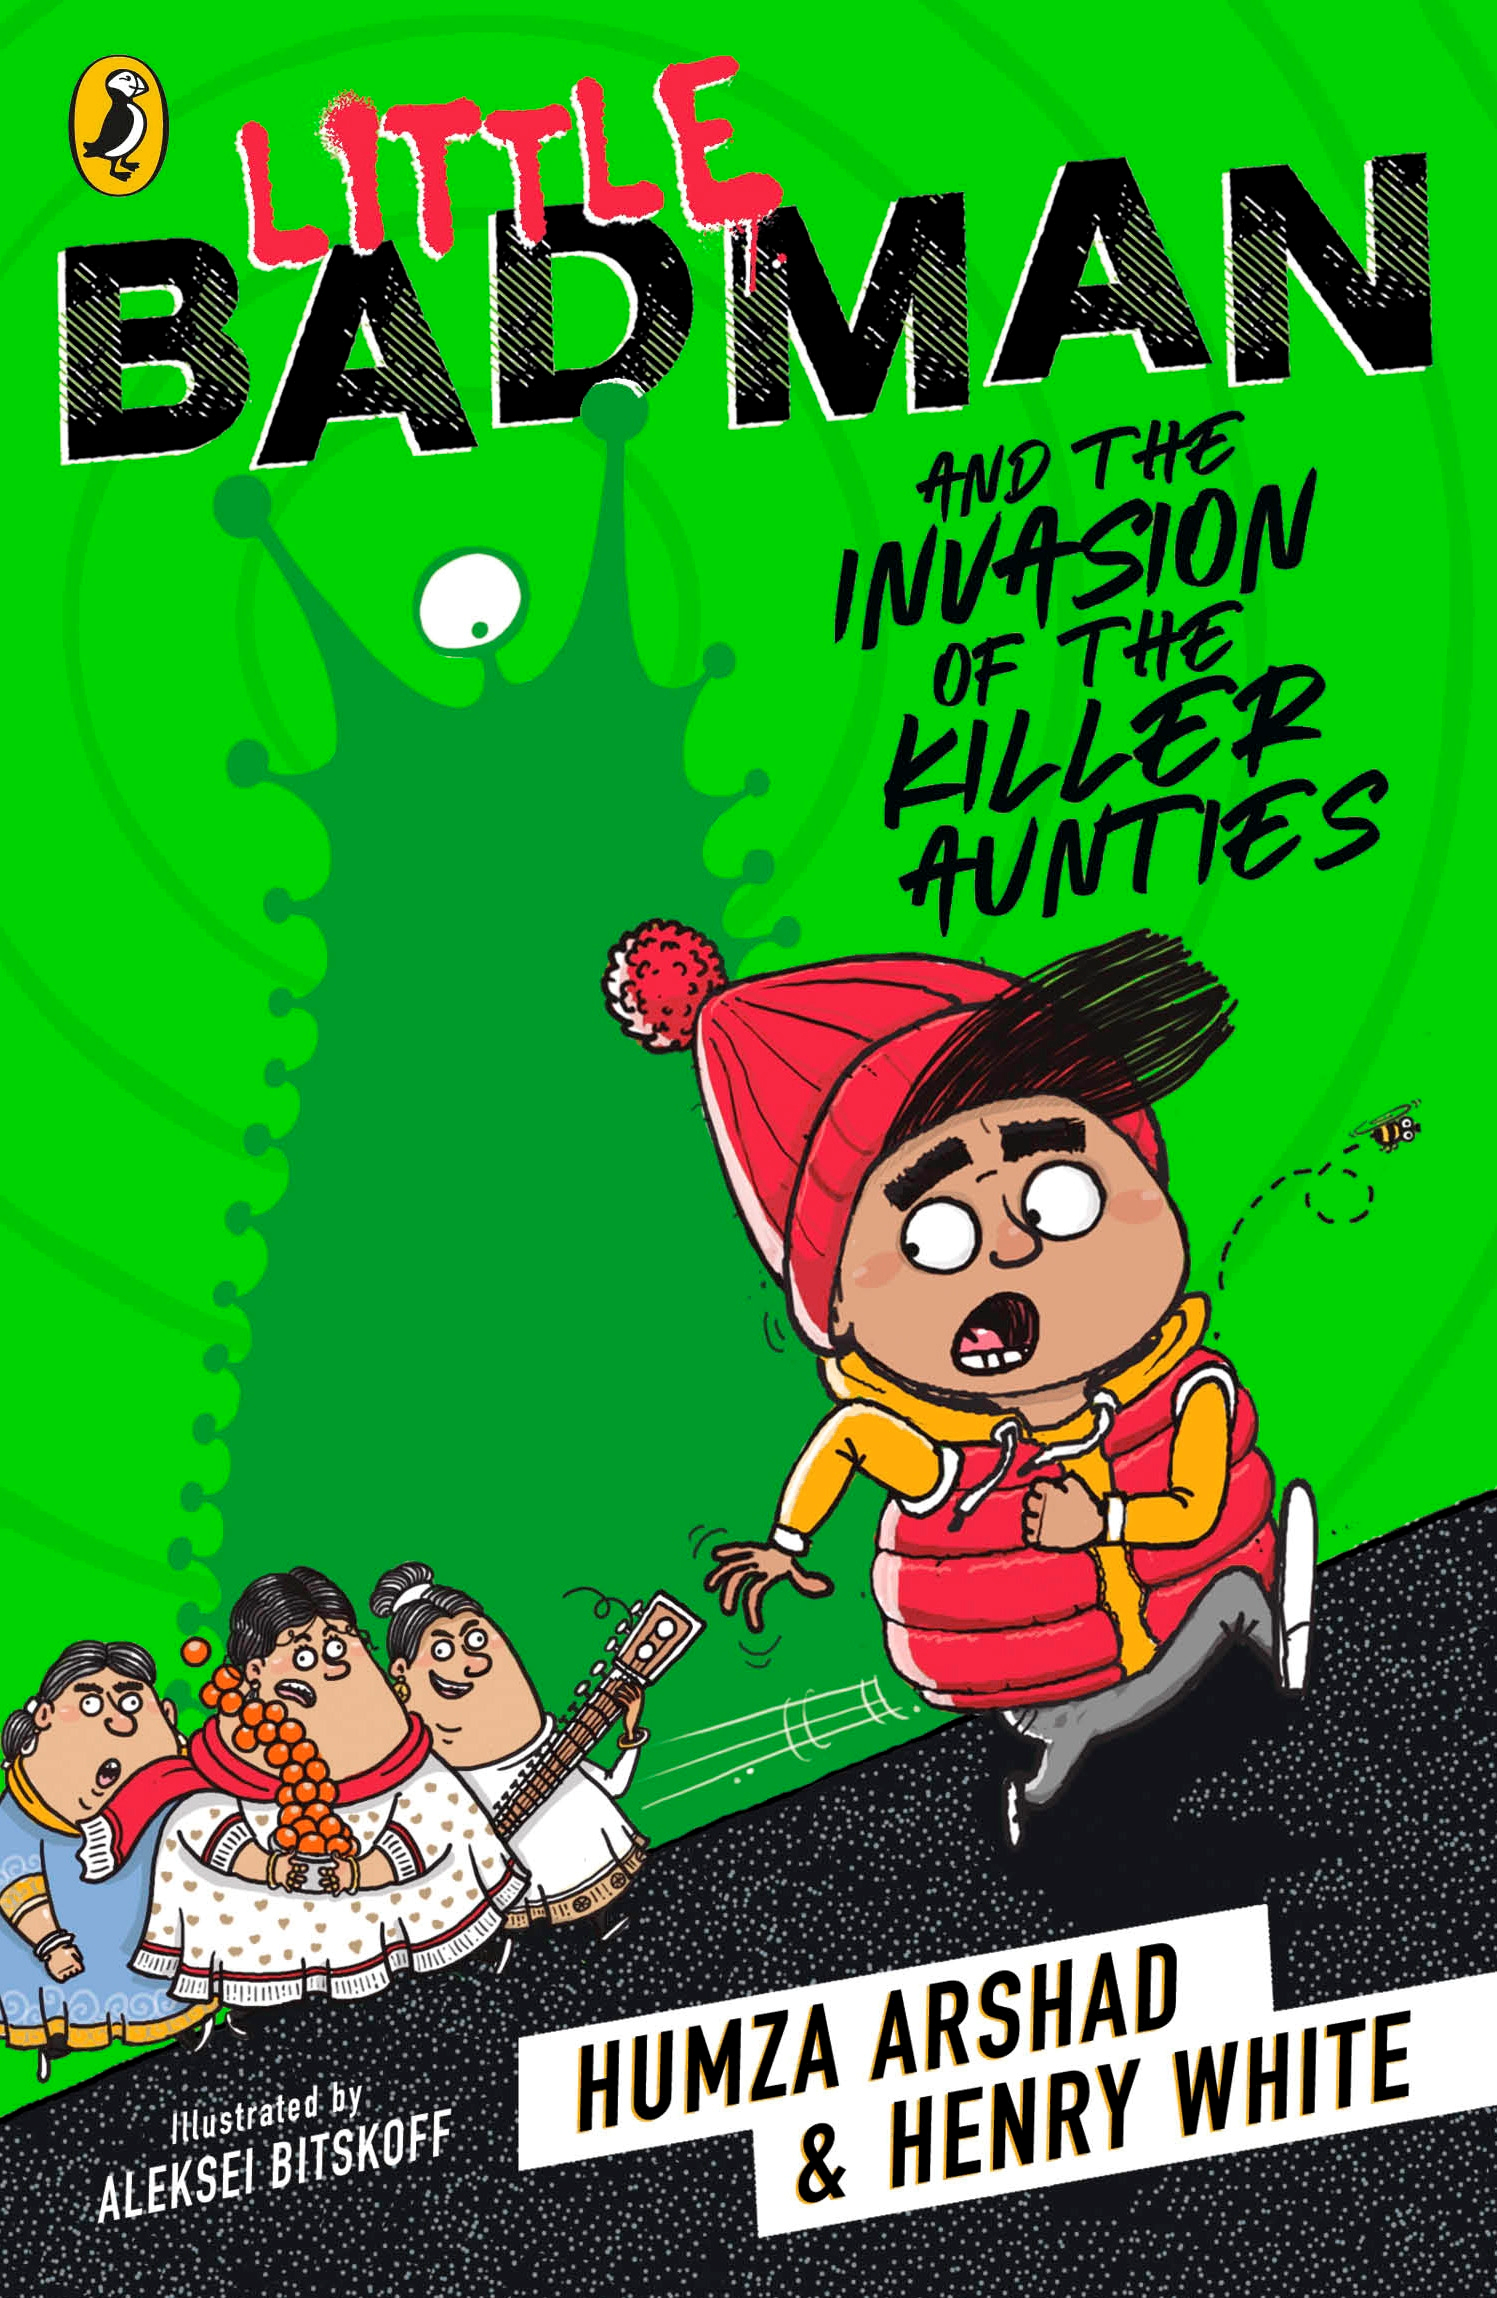 Little Badman and the Invasion of the Killer Aunties.